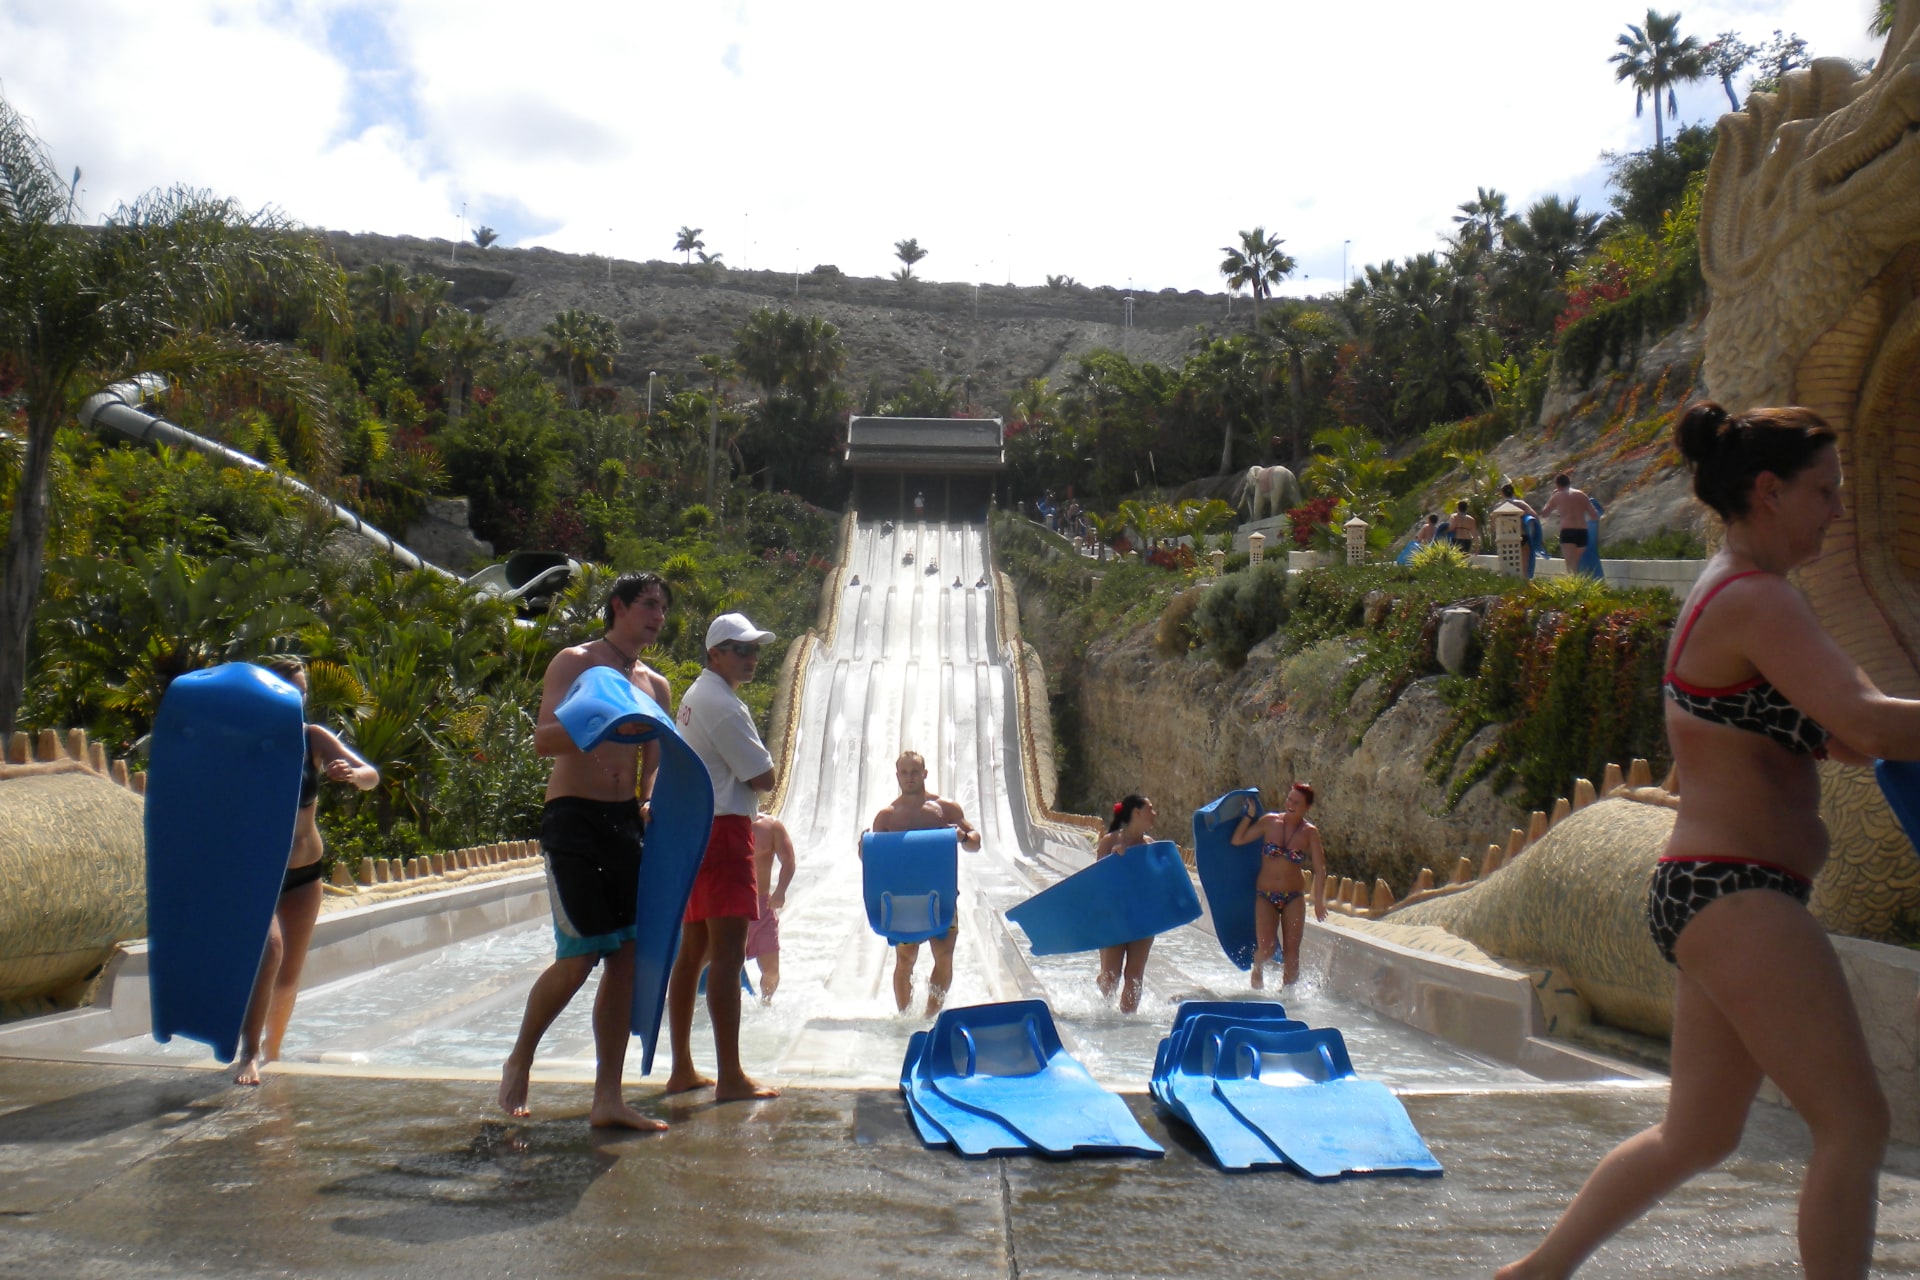 Excited participants crossing the finish line of Naga Racer at Siam Park, Tenerife